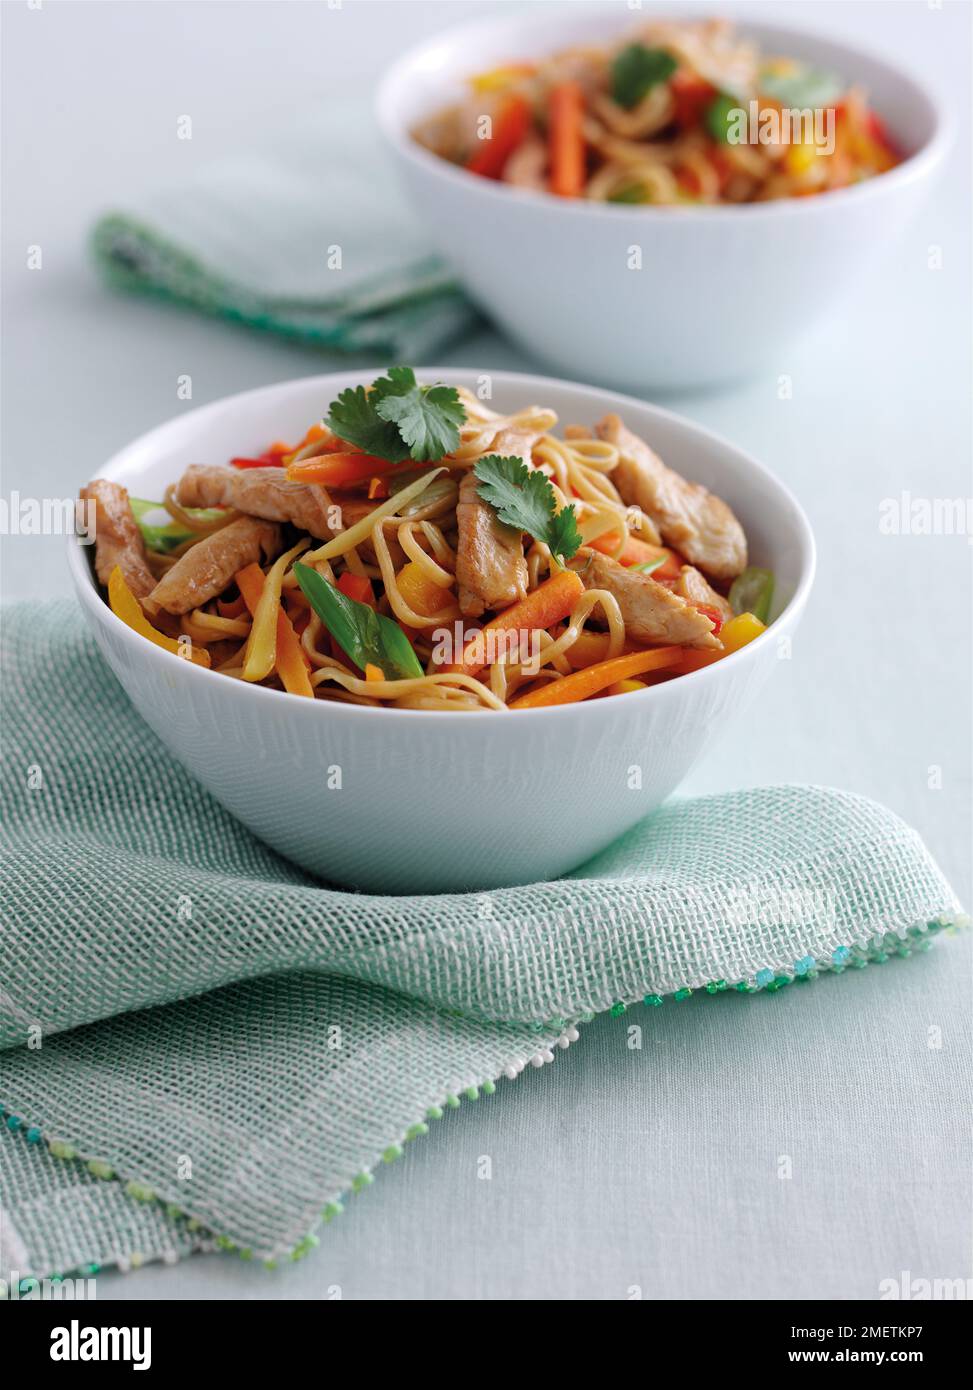 Bowls of stir-fried ginger chicken and vegetable curry served with noodles and garnished with coriander Stock Photo